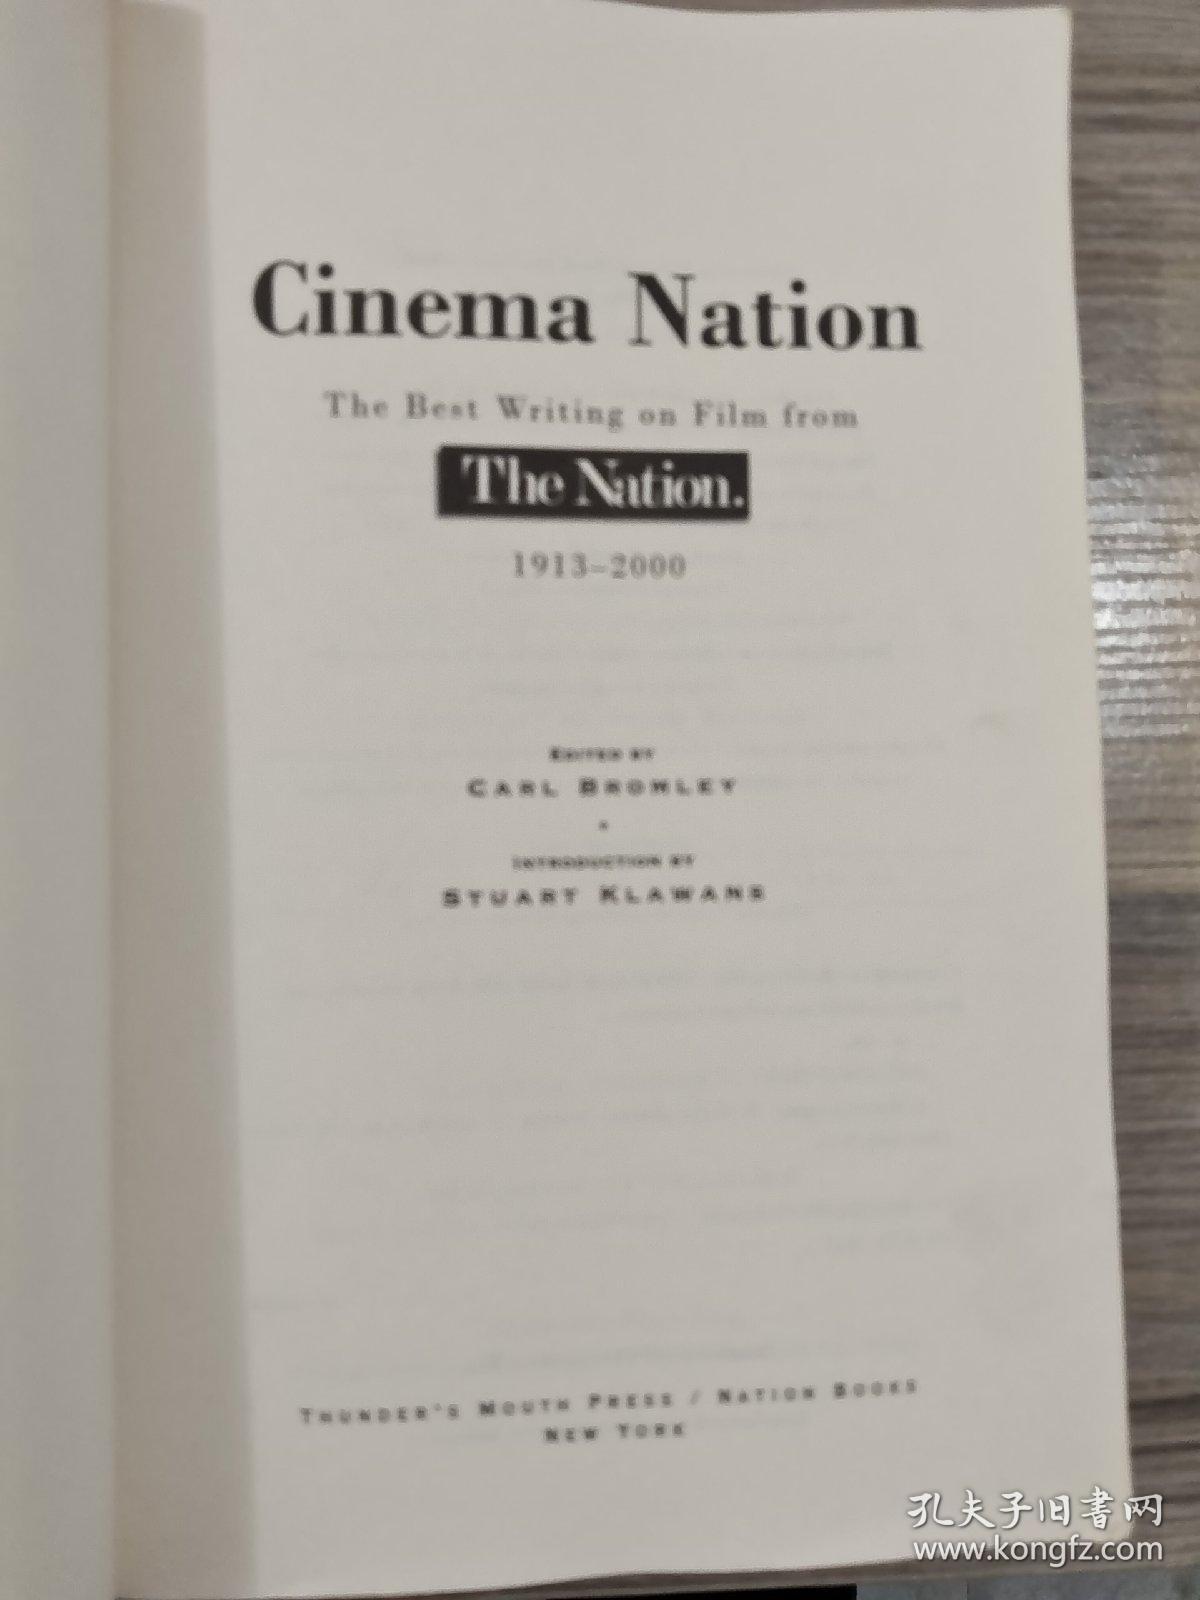 cinema nation  the best writing on film from the nation .1913-2000电影之国1913-2000年全国最佳电影编剧